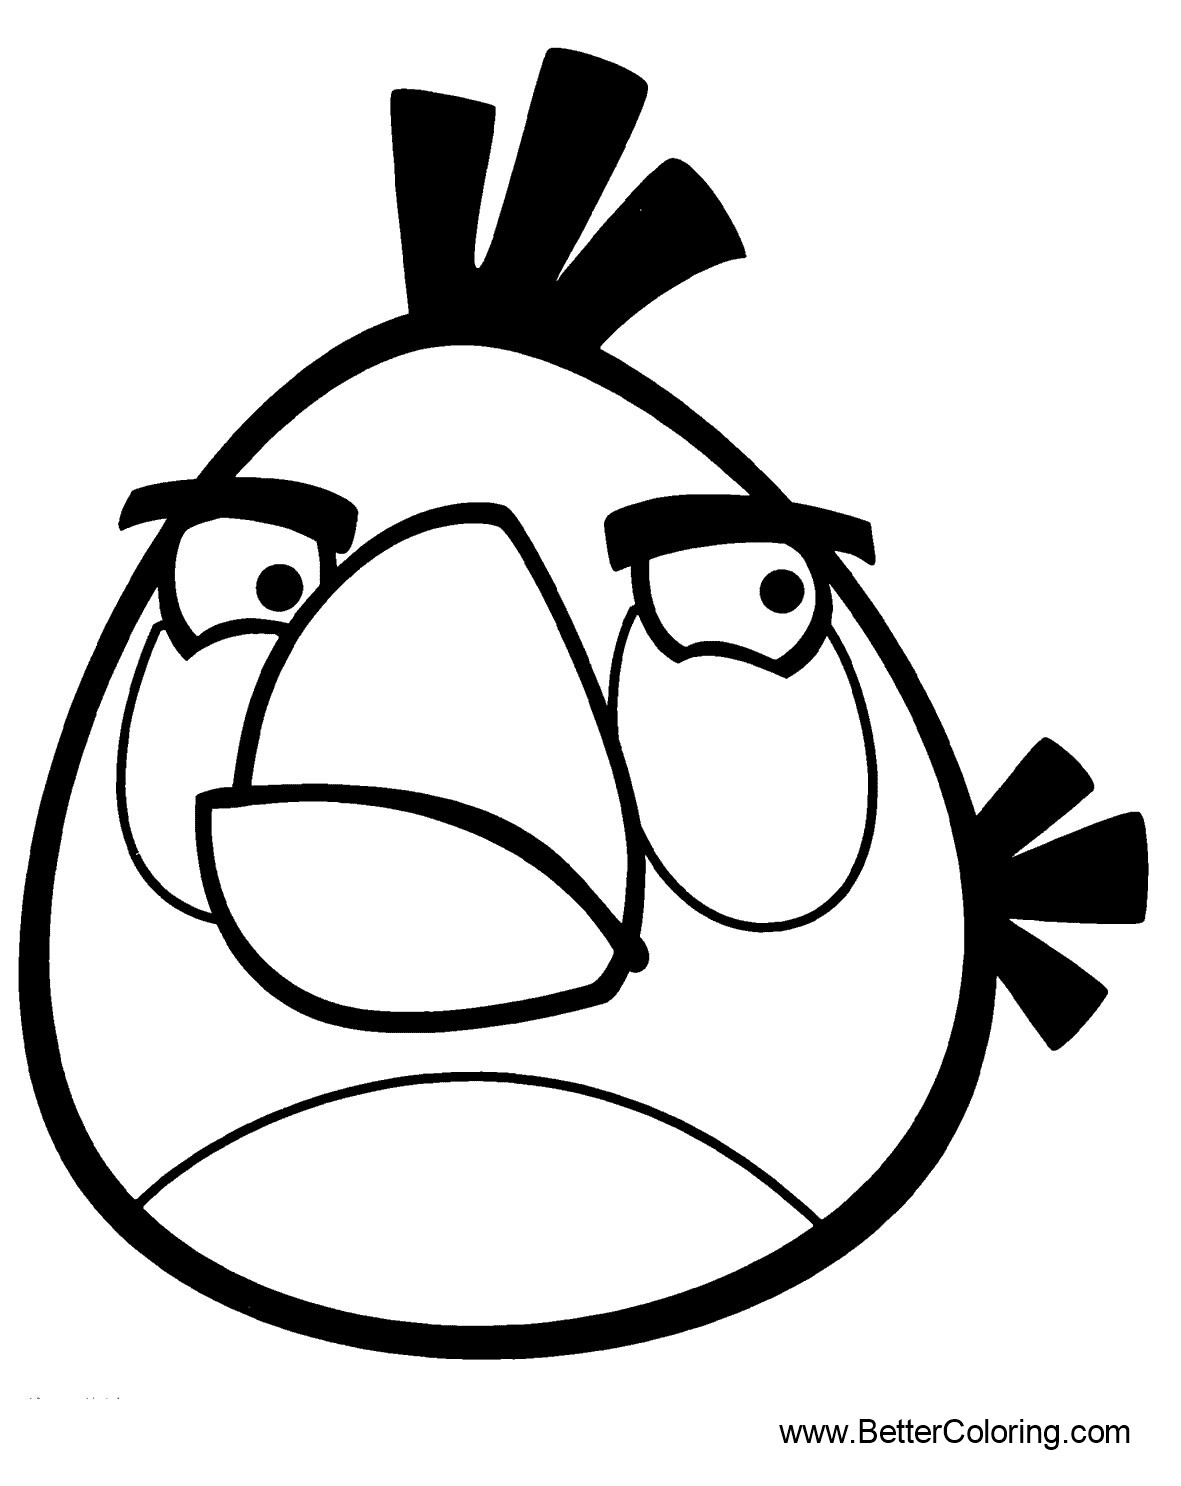 White Angry Birds Coloring Pages - Free Printable Coloring Pages